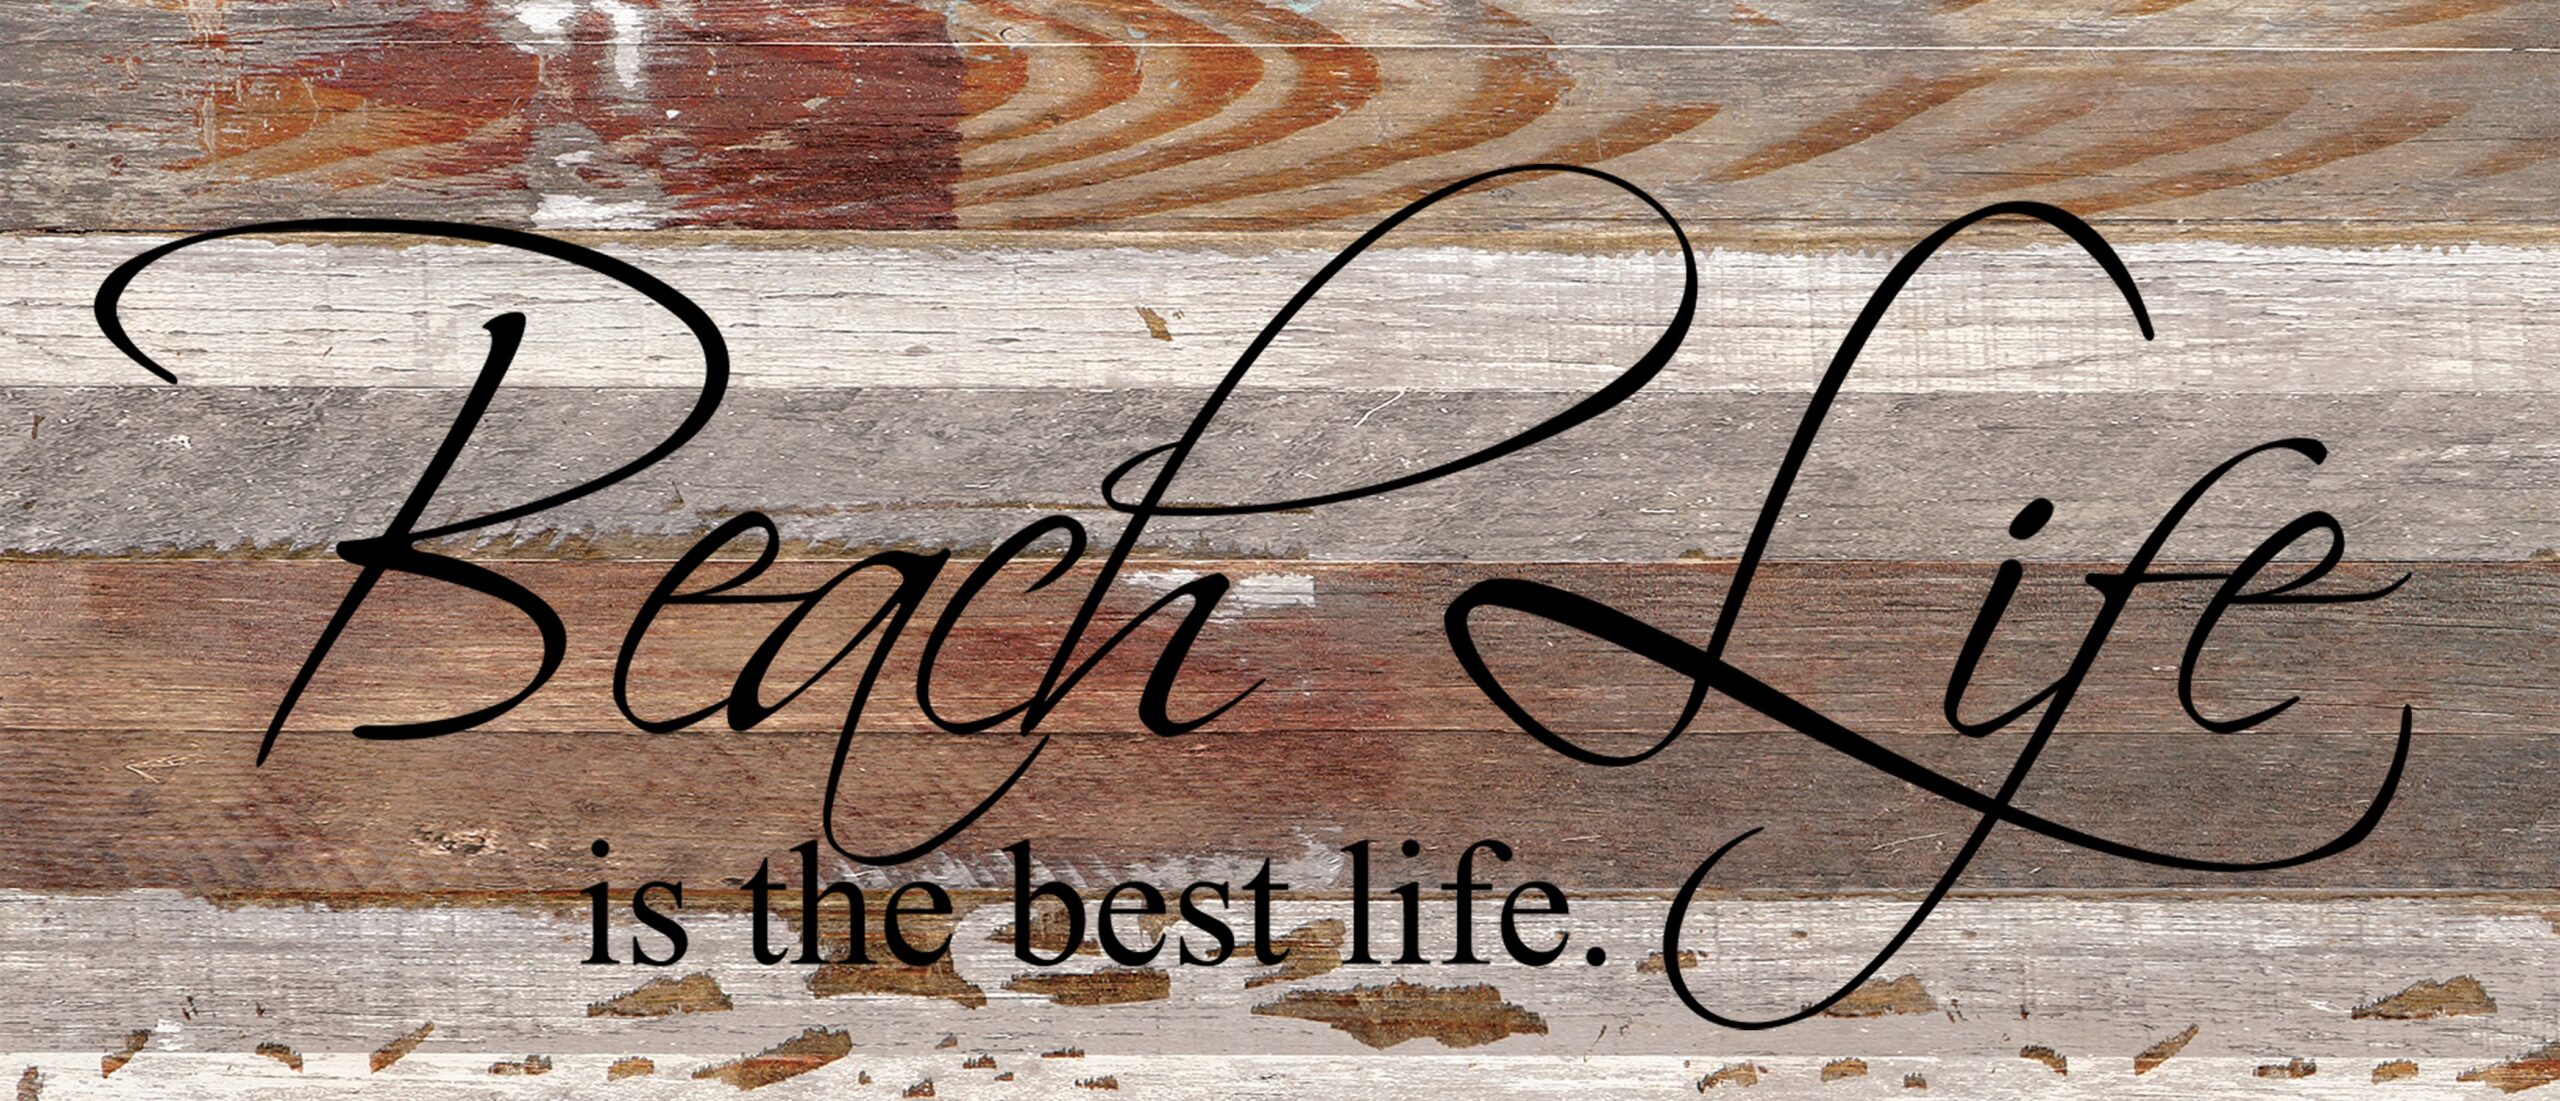 Beach life is the best life. / 14"x6" Reclaimed Wood Sign